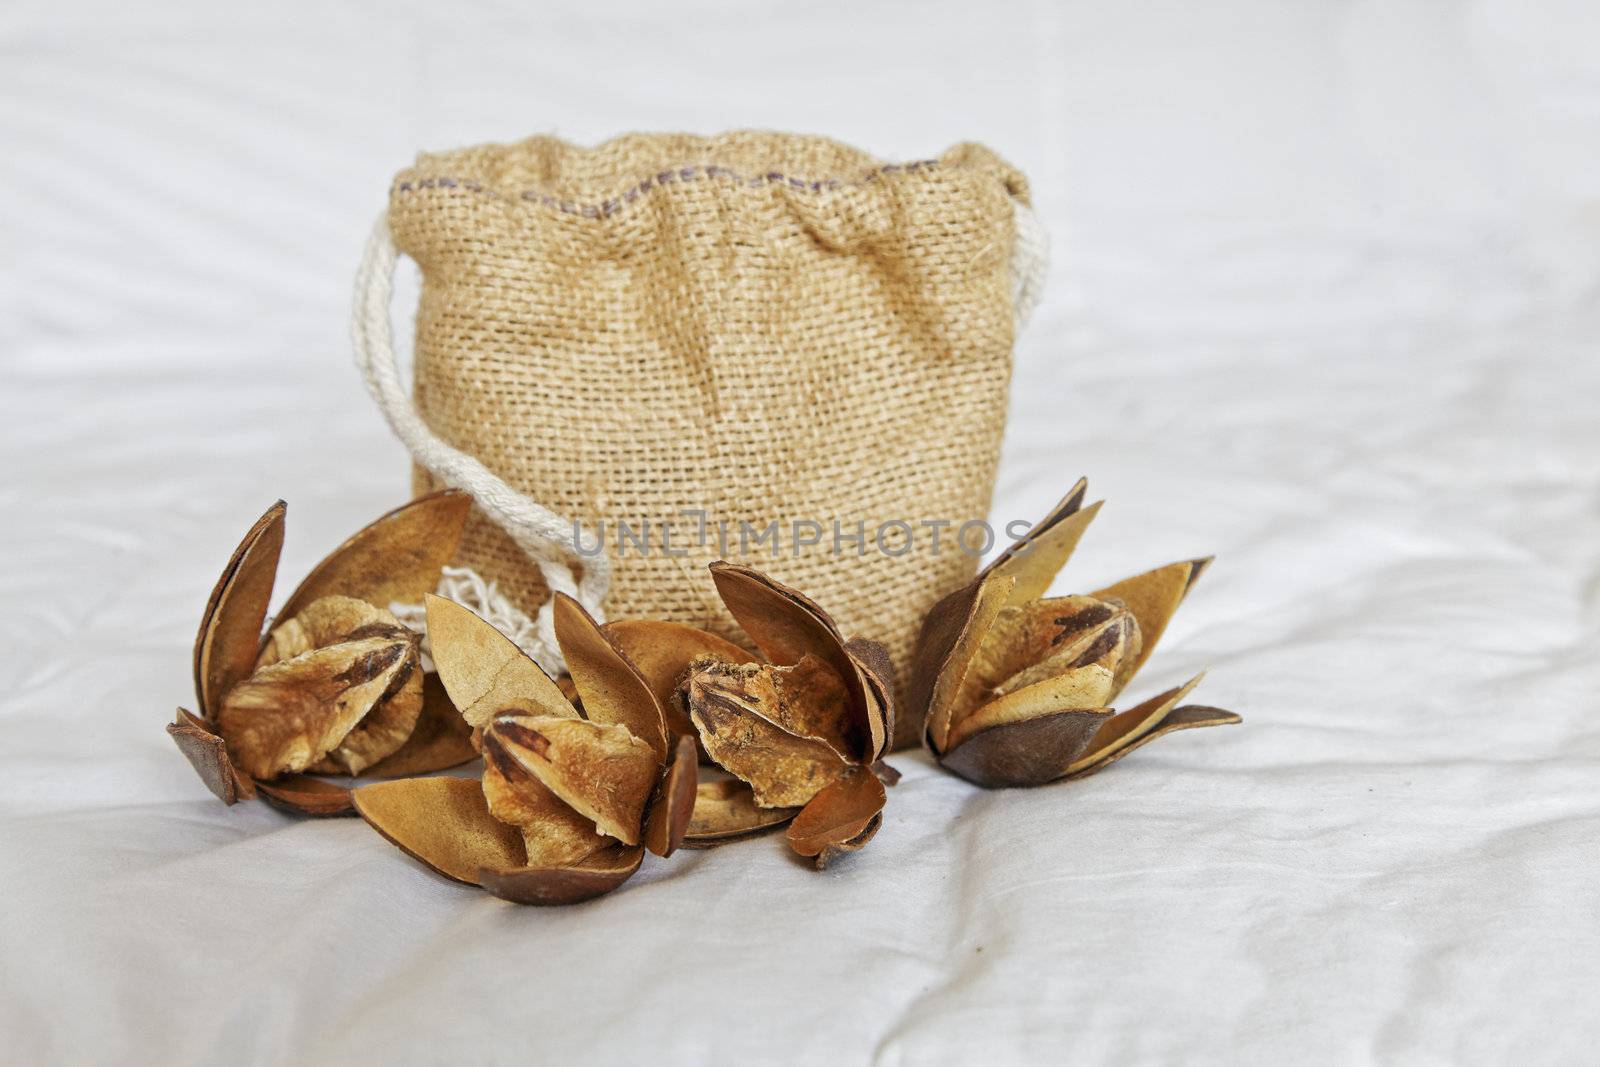 A display of cotton dehydrated buds with open petals showing cotton squares with a hessian gift holdall presentation bag on a ruffled linen backdrop. Generic image taken in a Bangalore studio, India